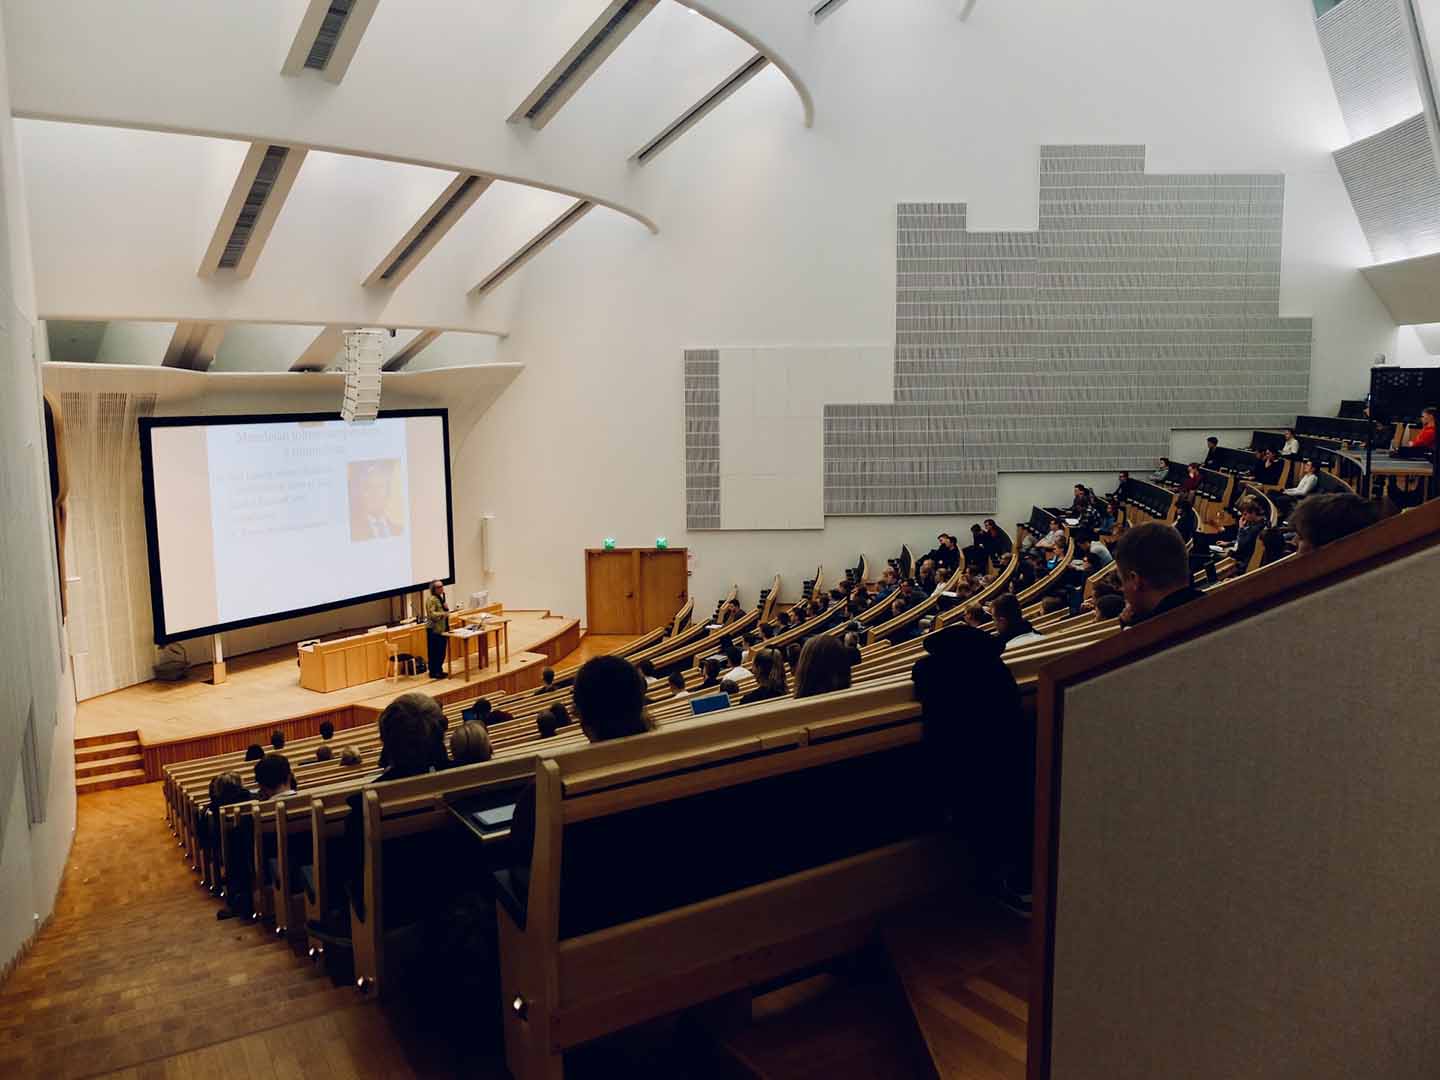 University lecture hall with professor presenting